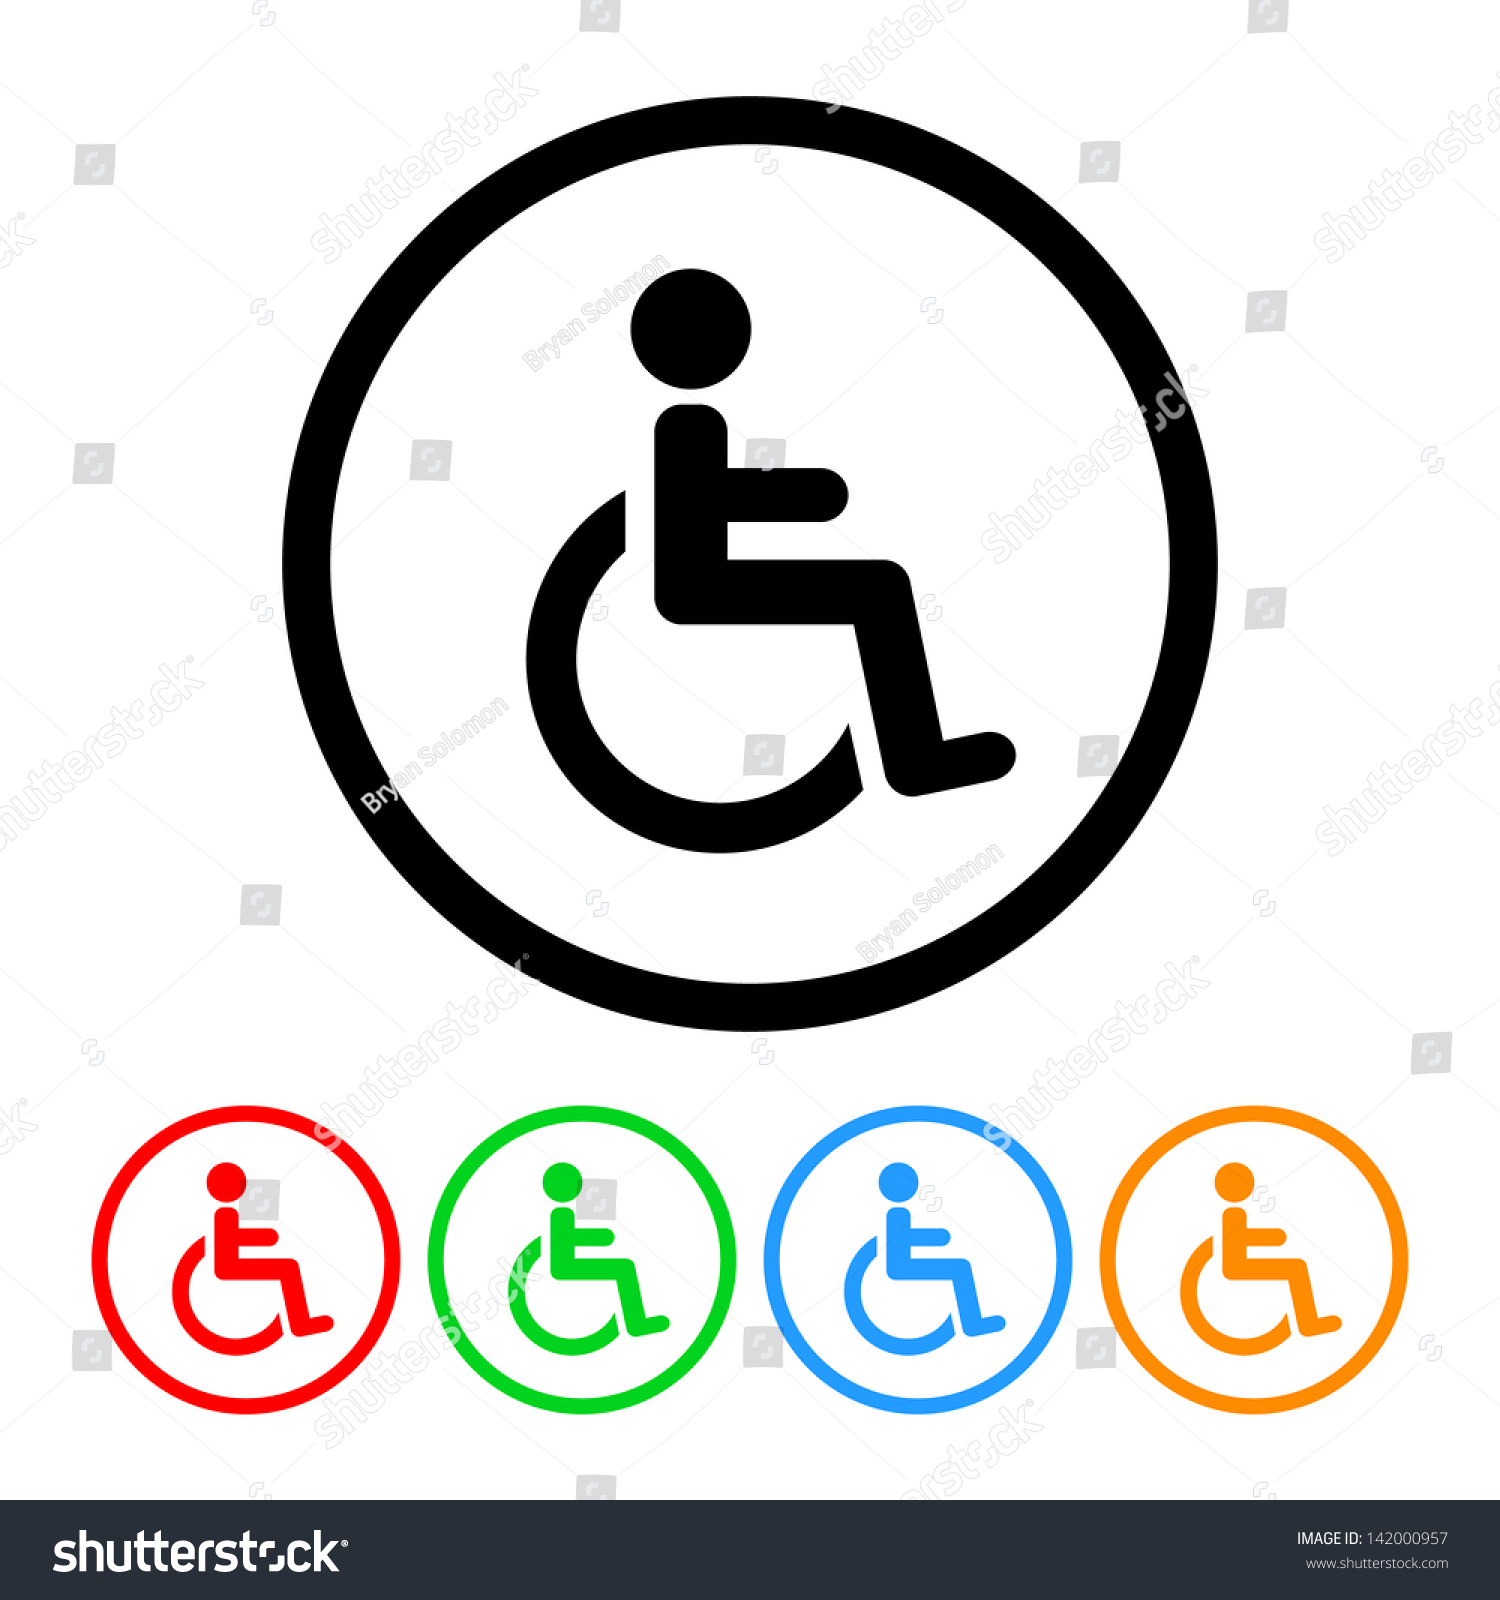 Wheelchair Handicap Icon in Vector Format with Four Color Variations #142000957